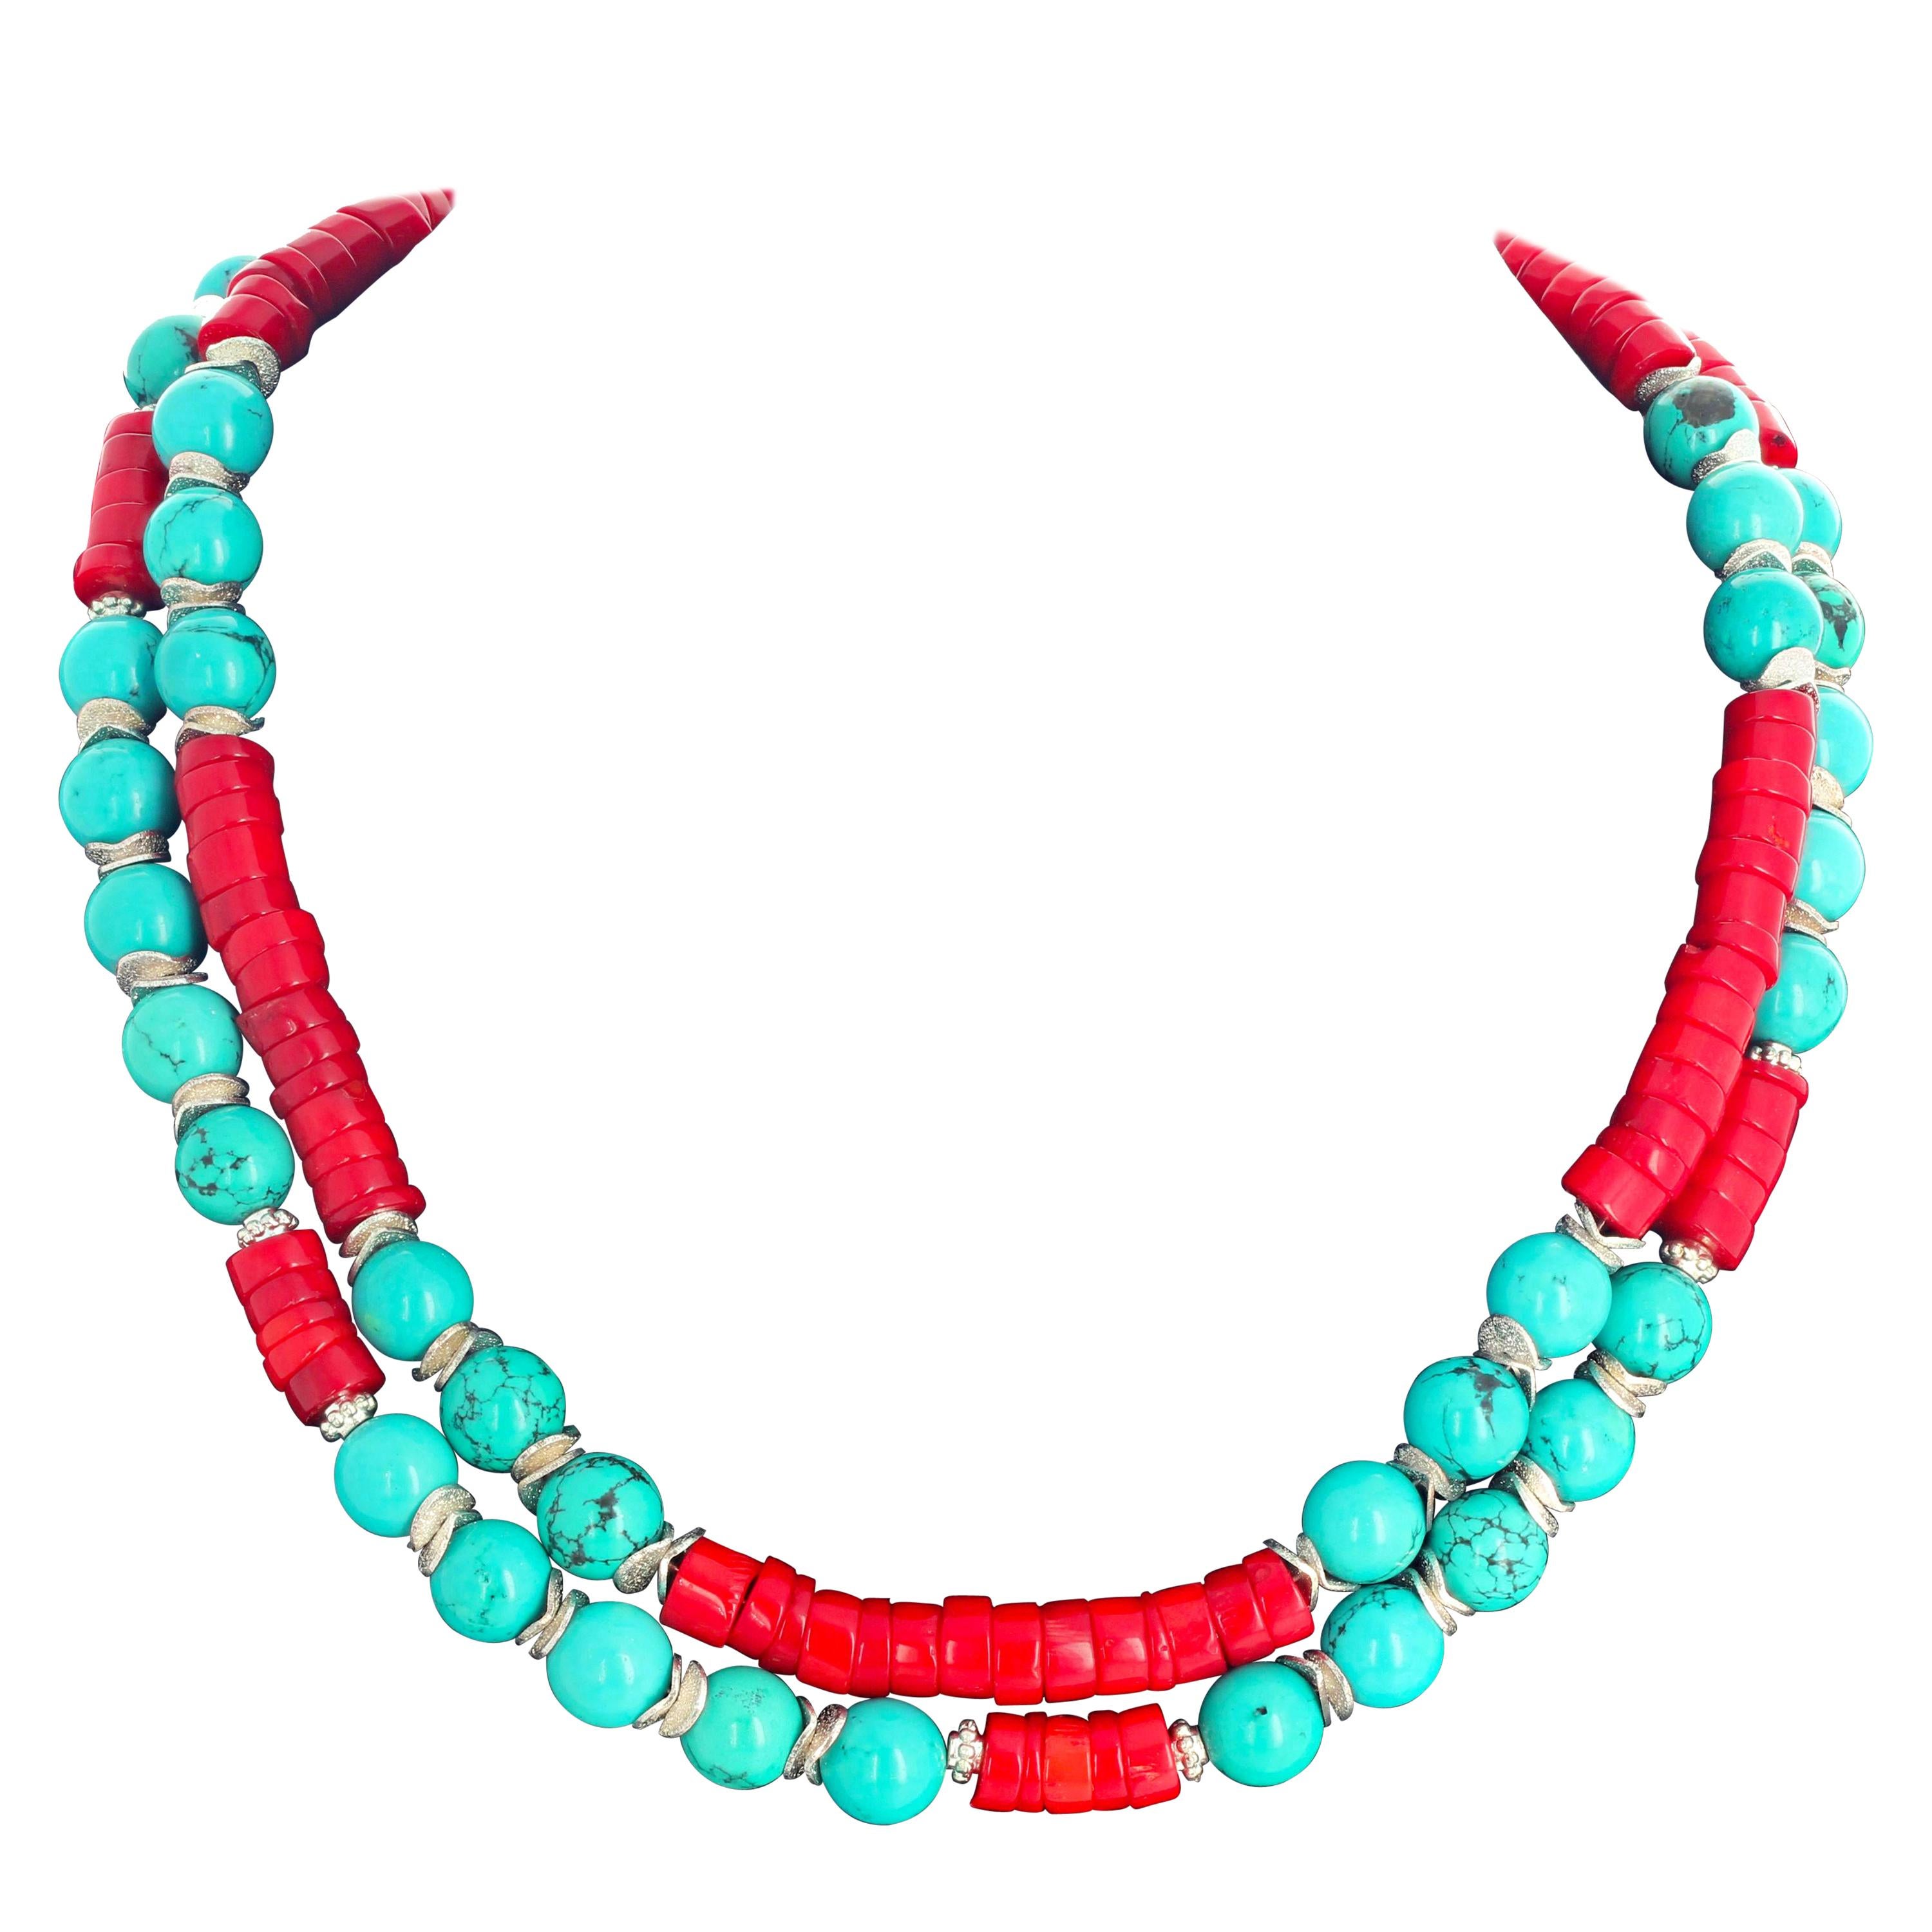 Gemjunky BoHo Chic Turquoise and Red Bamboo Coral Double Strand Necklace